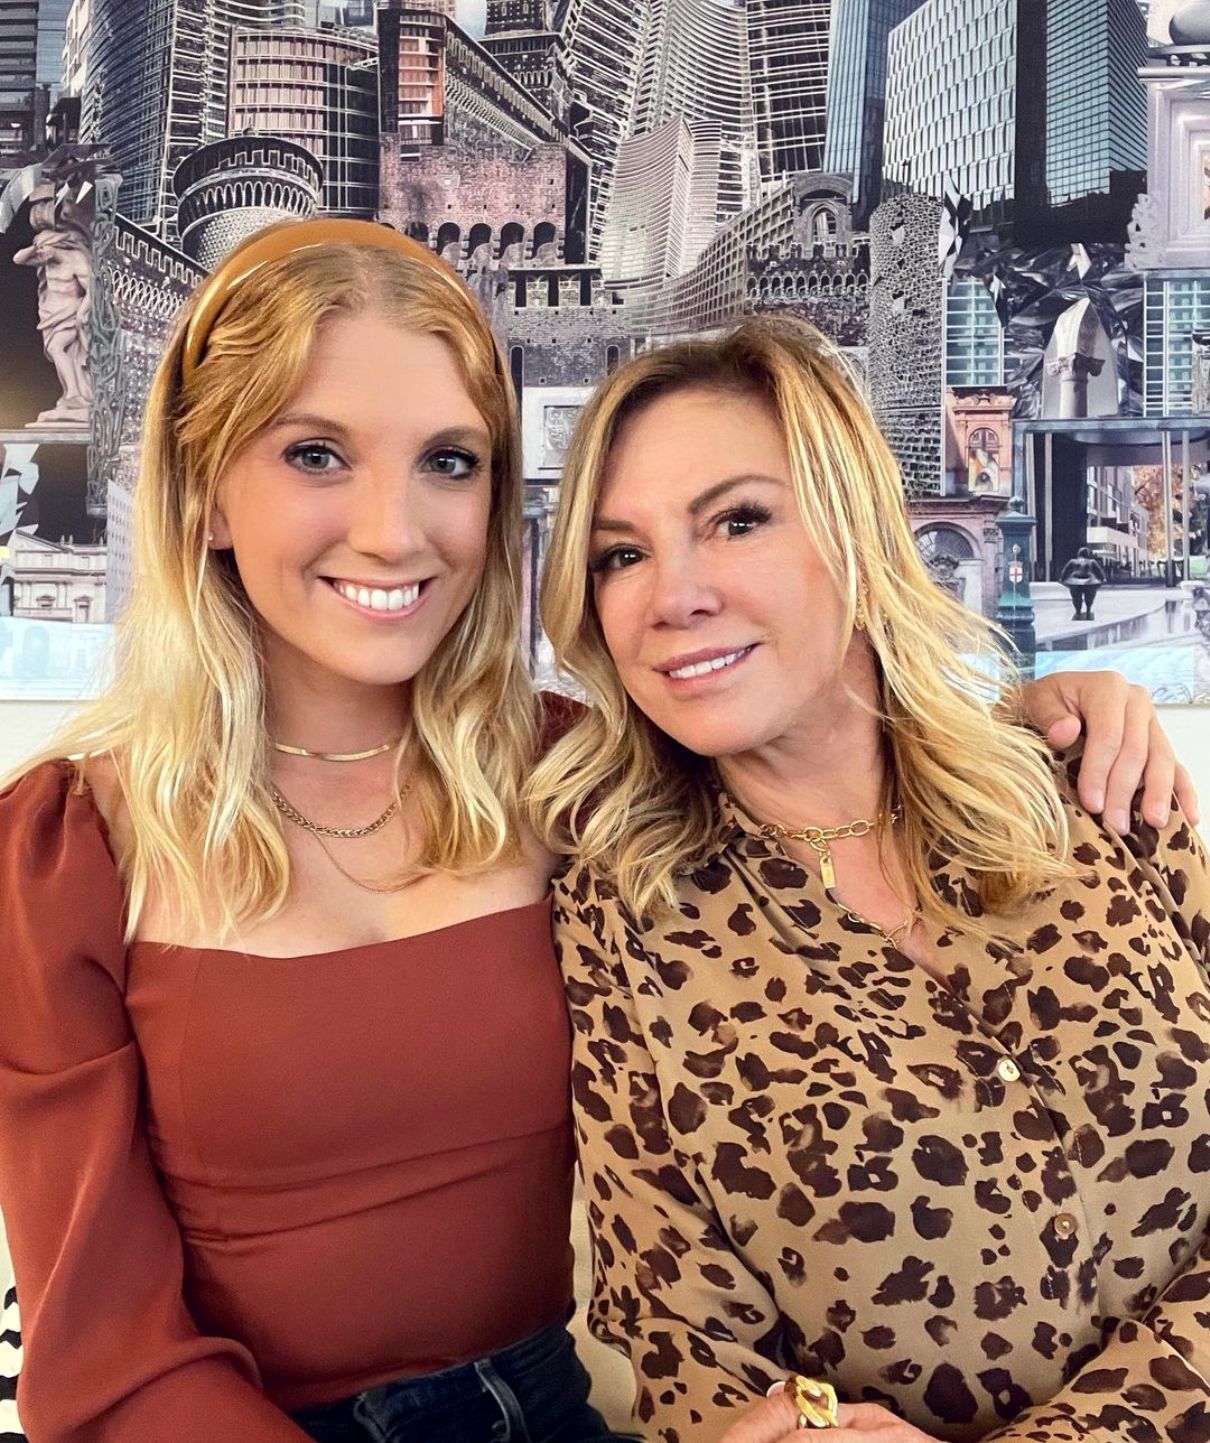 Ramona Singer Reveals if She Misses RHONY, Says Her Personality Was "On Steroids" While Filming Show, Plus Daughter Avery Reveals New Business Venture